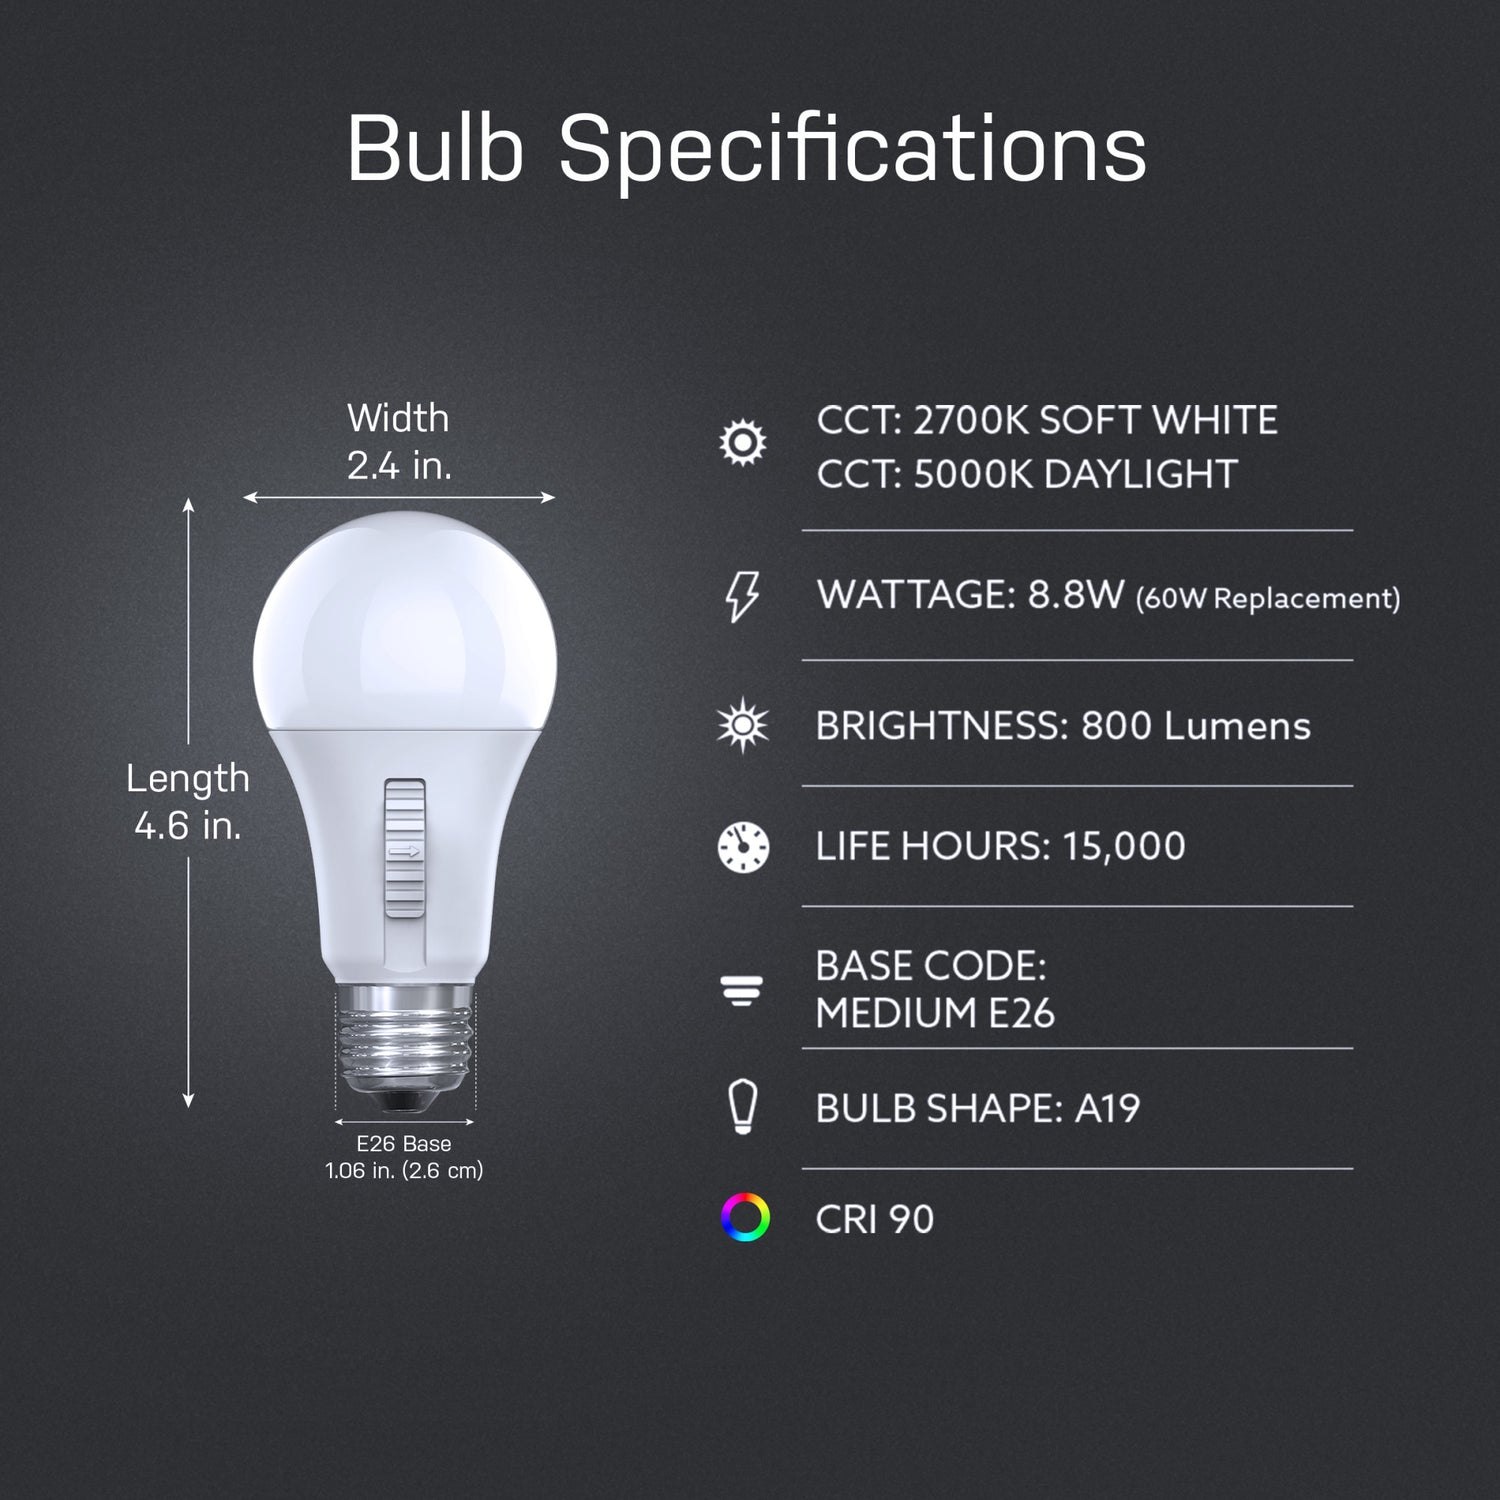 8.8W (60W Replacement) Color Selectable A19 Timer LED Bulb